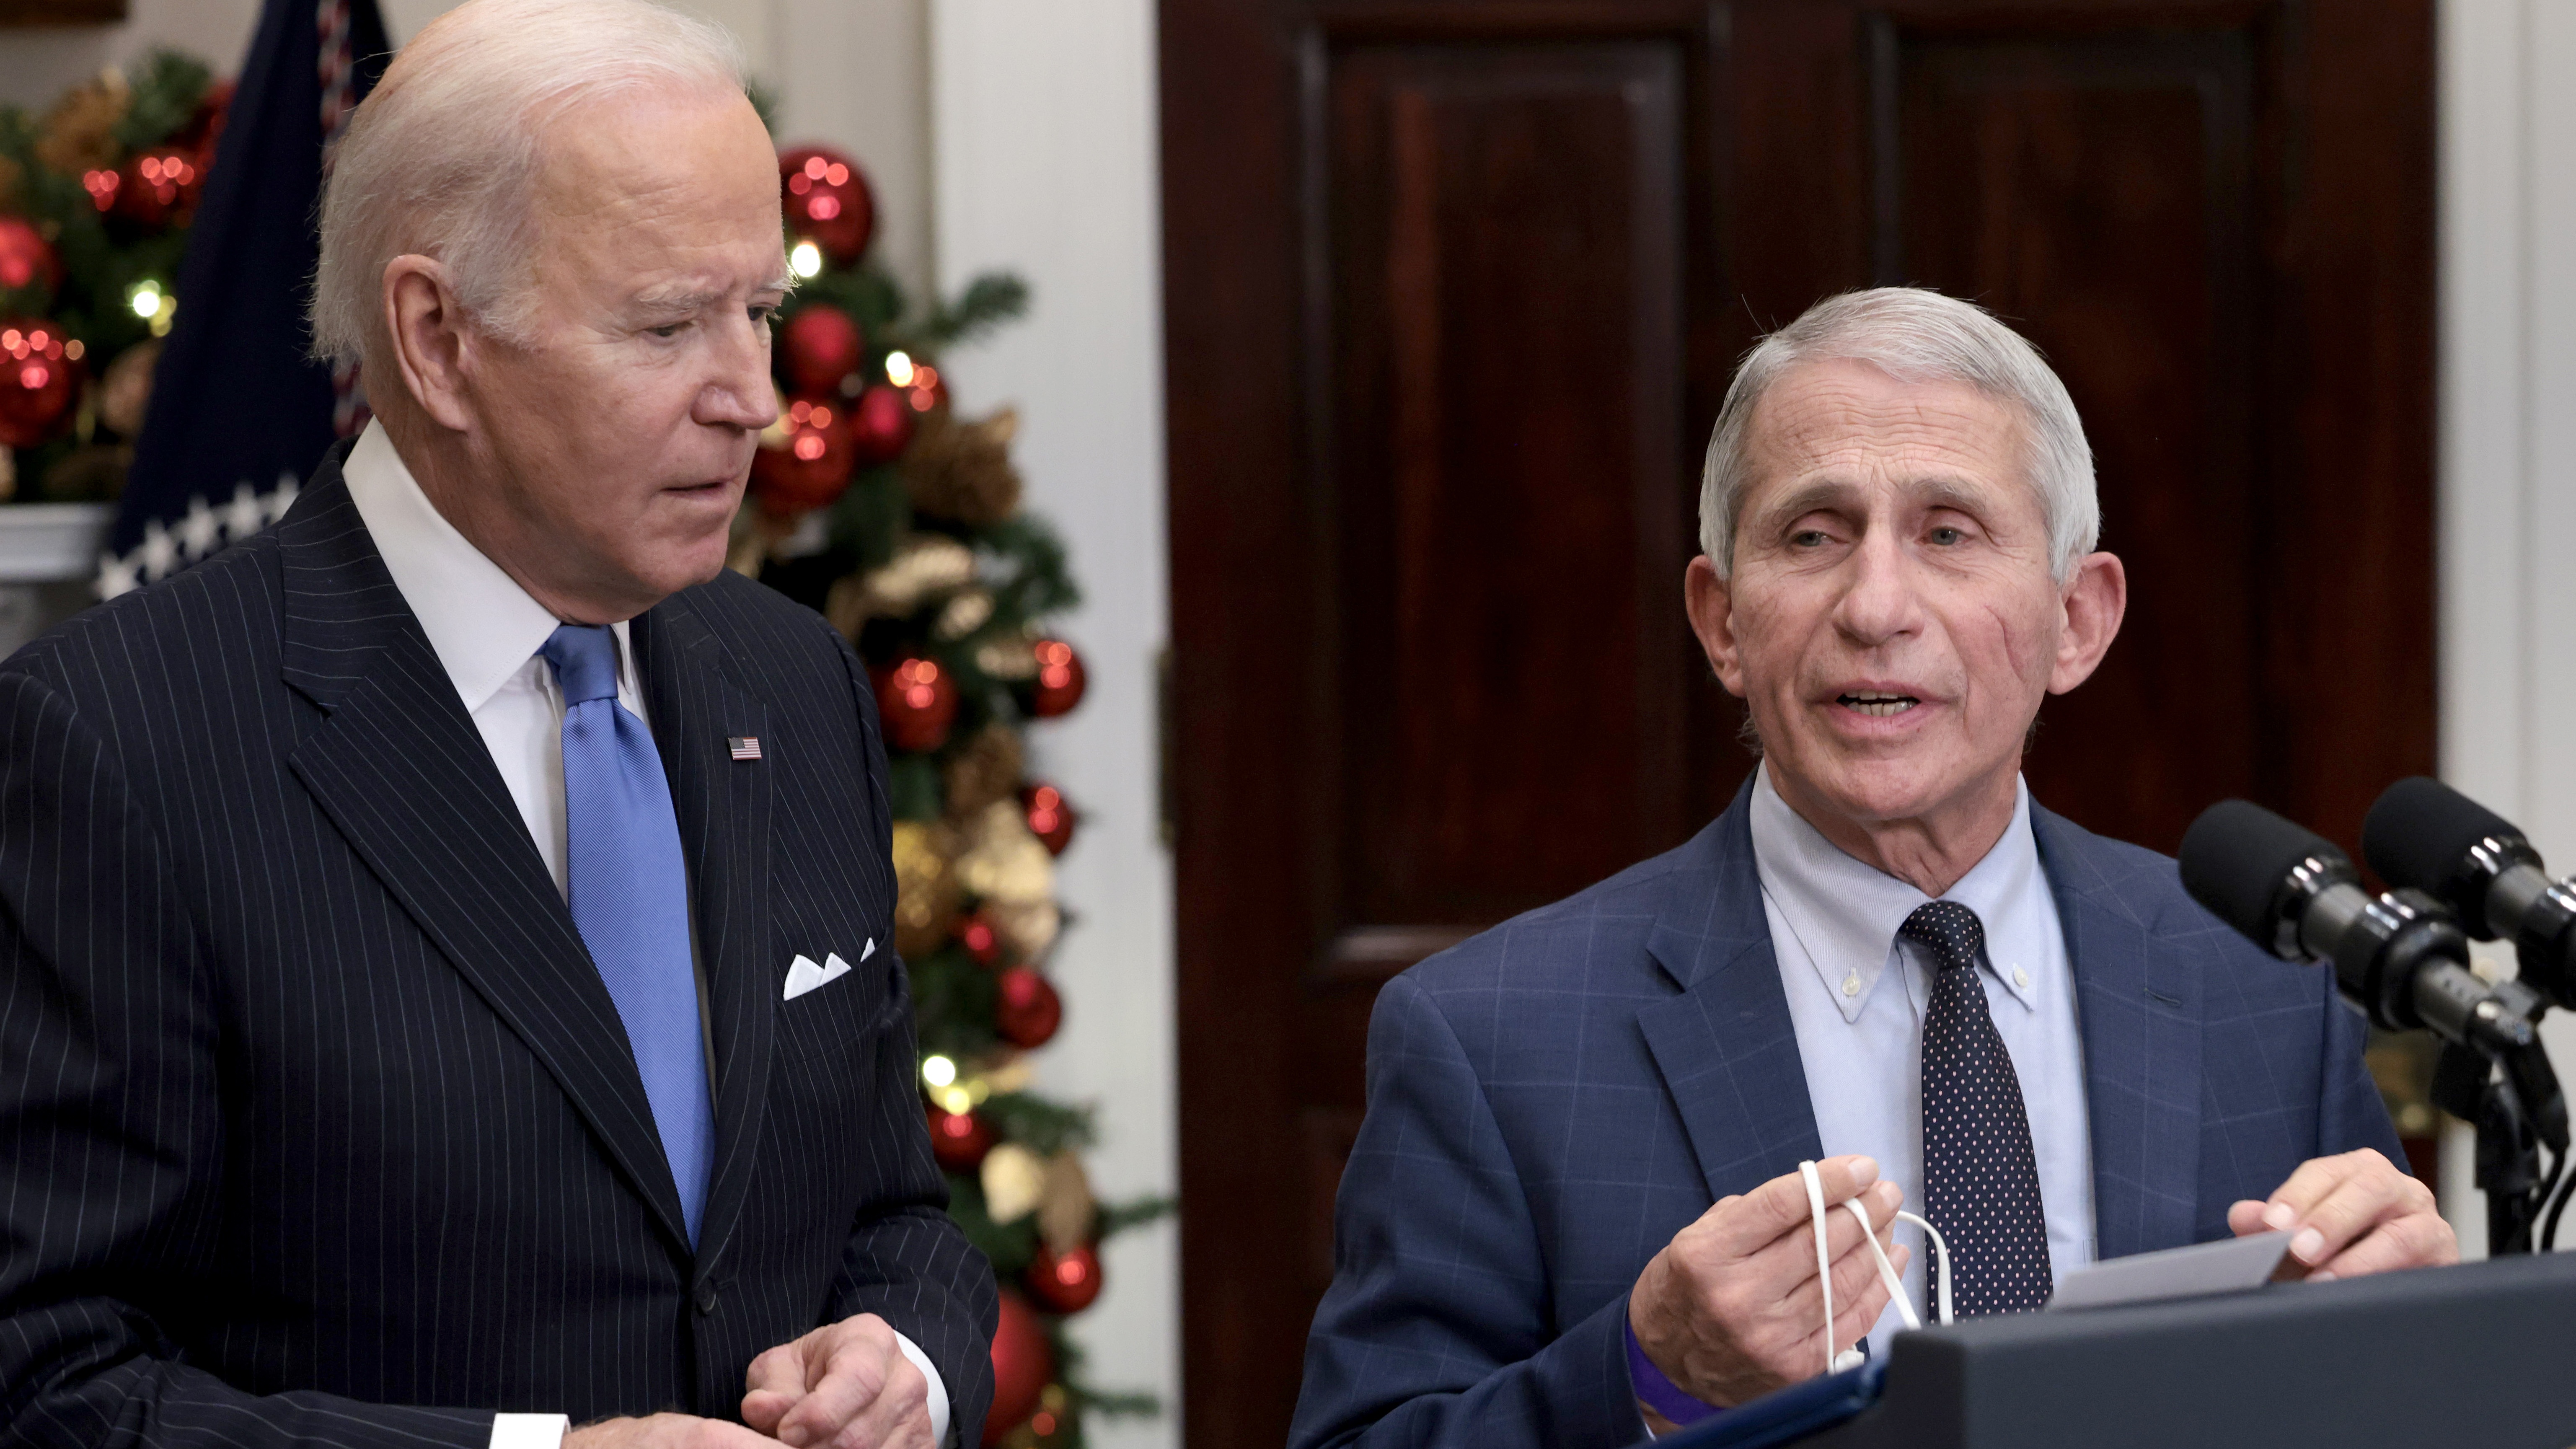 Joe Biden with his Chief Medical Adviser Anthony Fauci